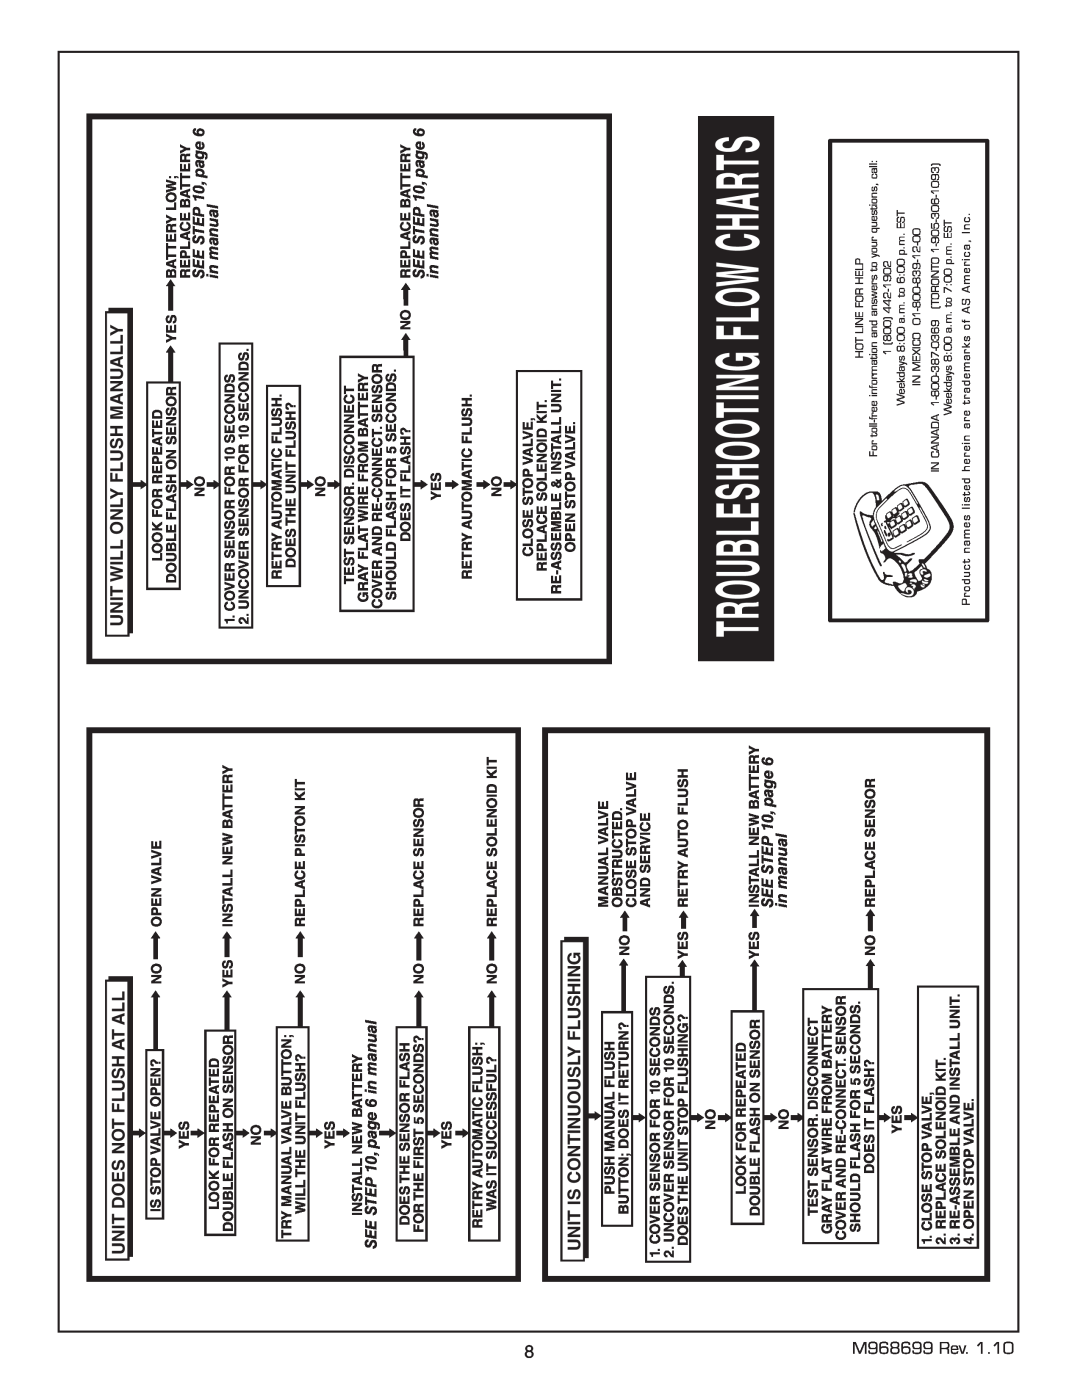 American Standard 6065.121, 6065.161, 6065.565, 6065.122, 6065.162 Troubleshooting Flow Charts, SEE , page 6 in manual 